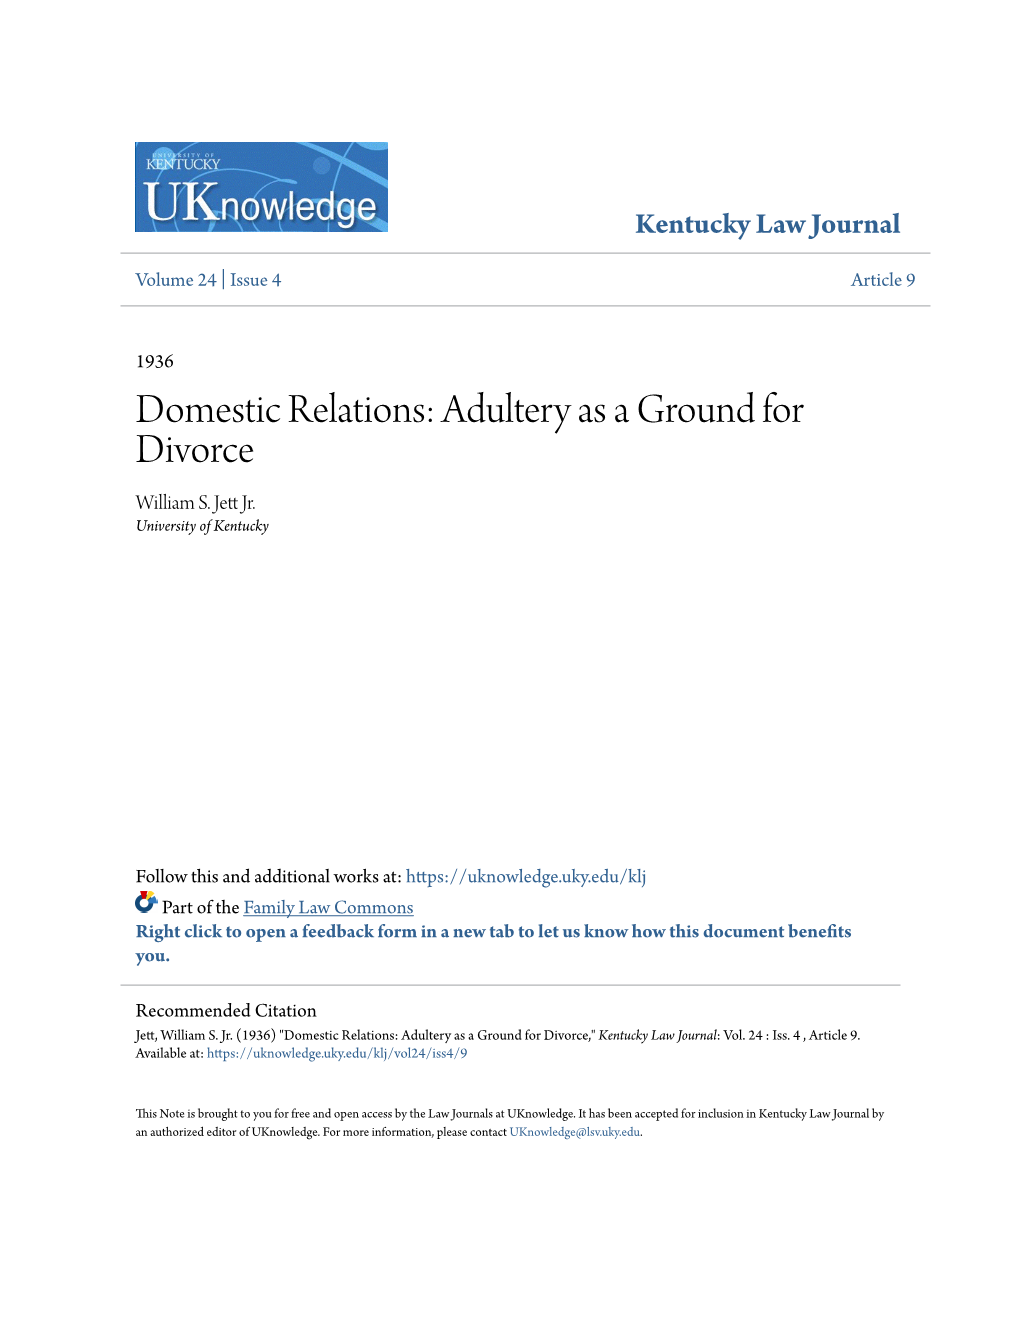 Domestic Relations: Adultery As a Ground for Divorce William S